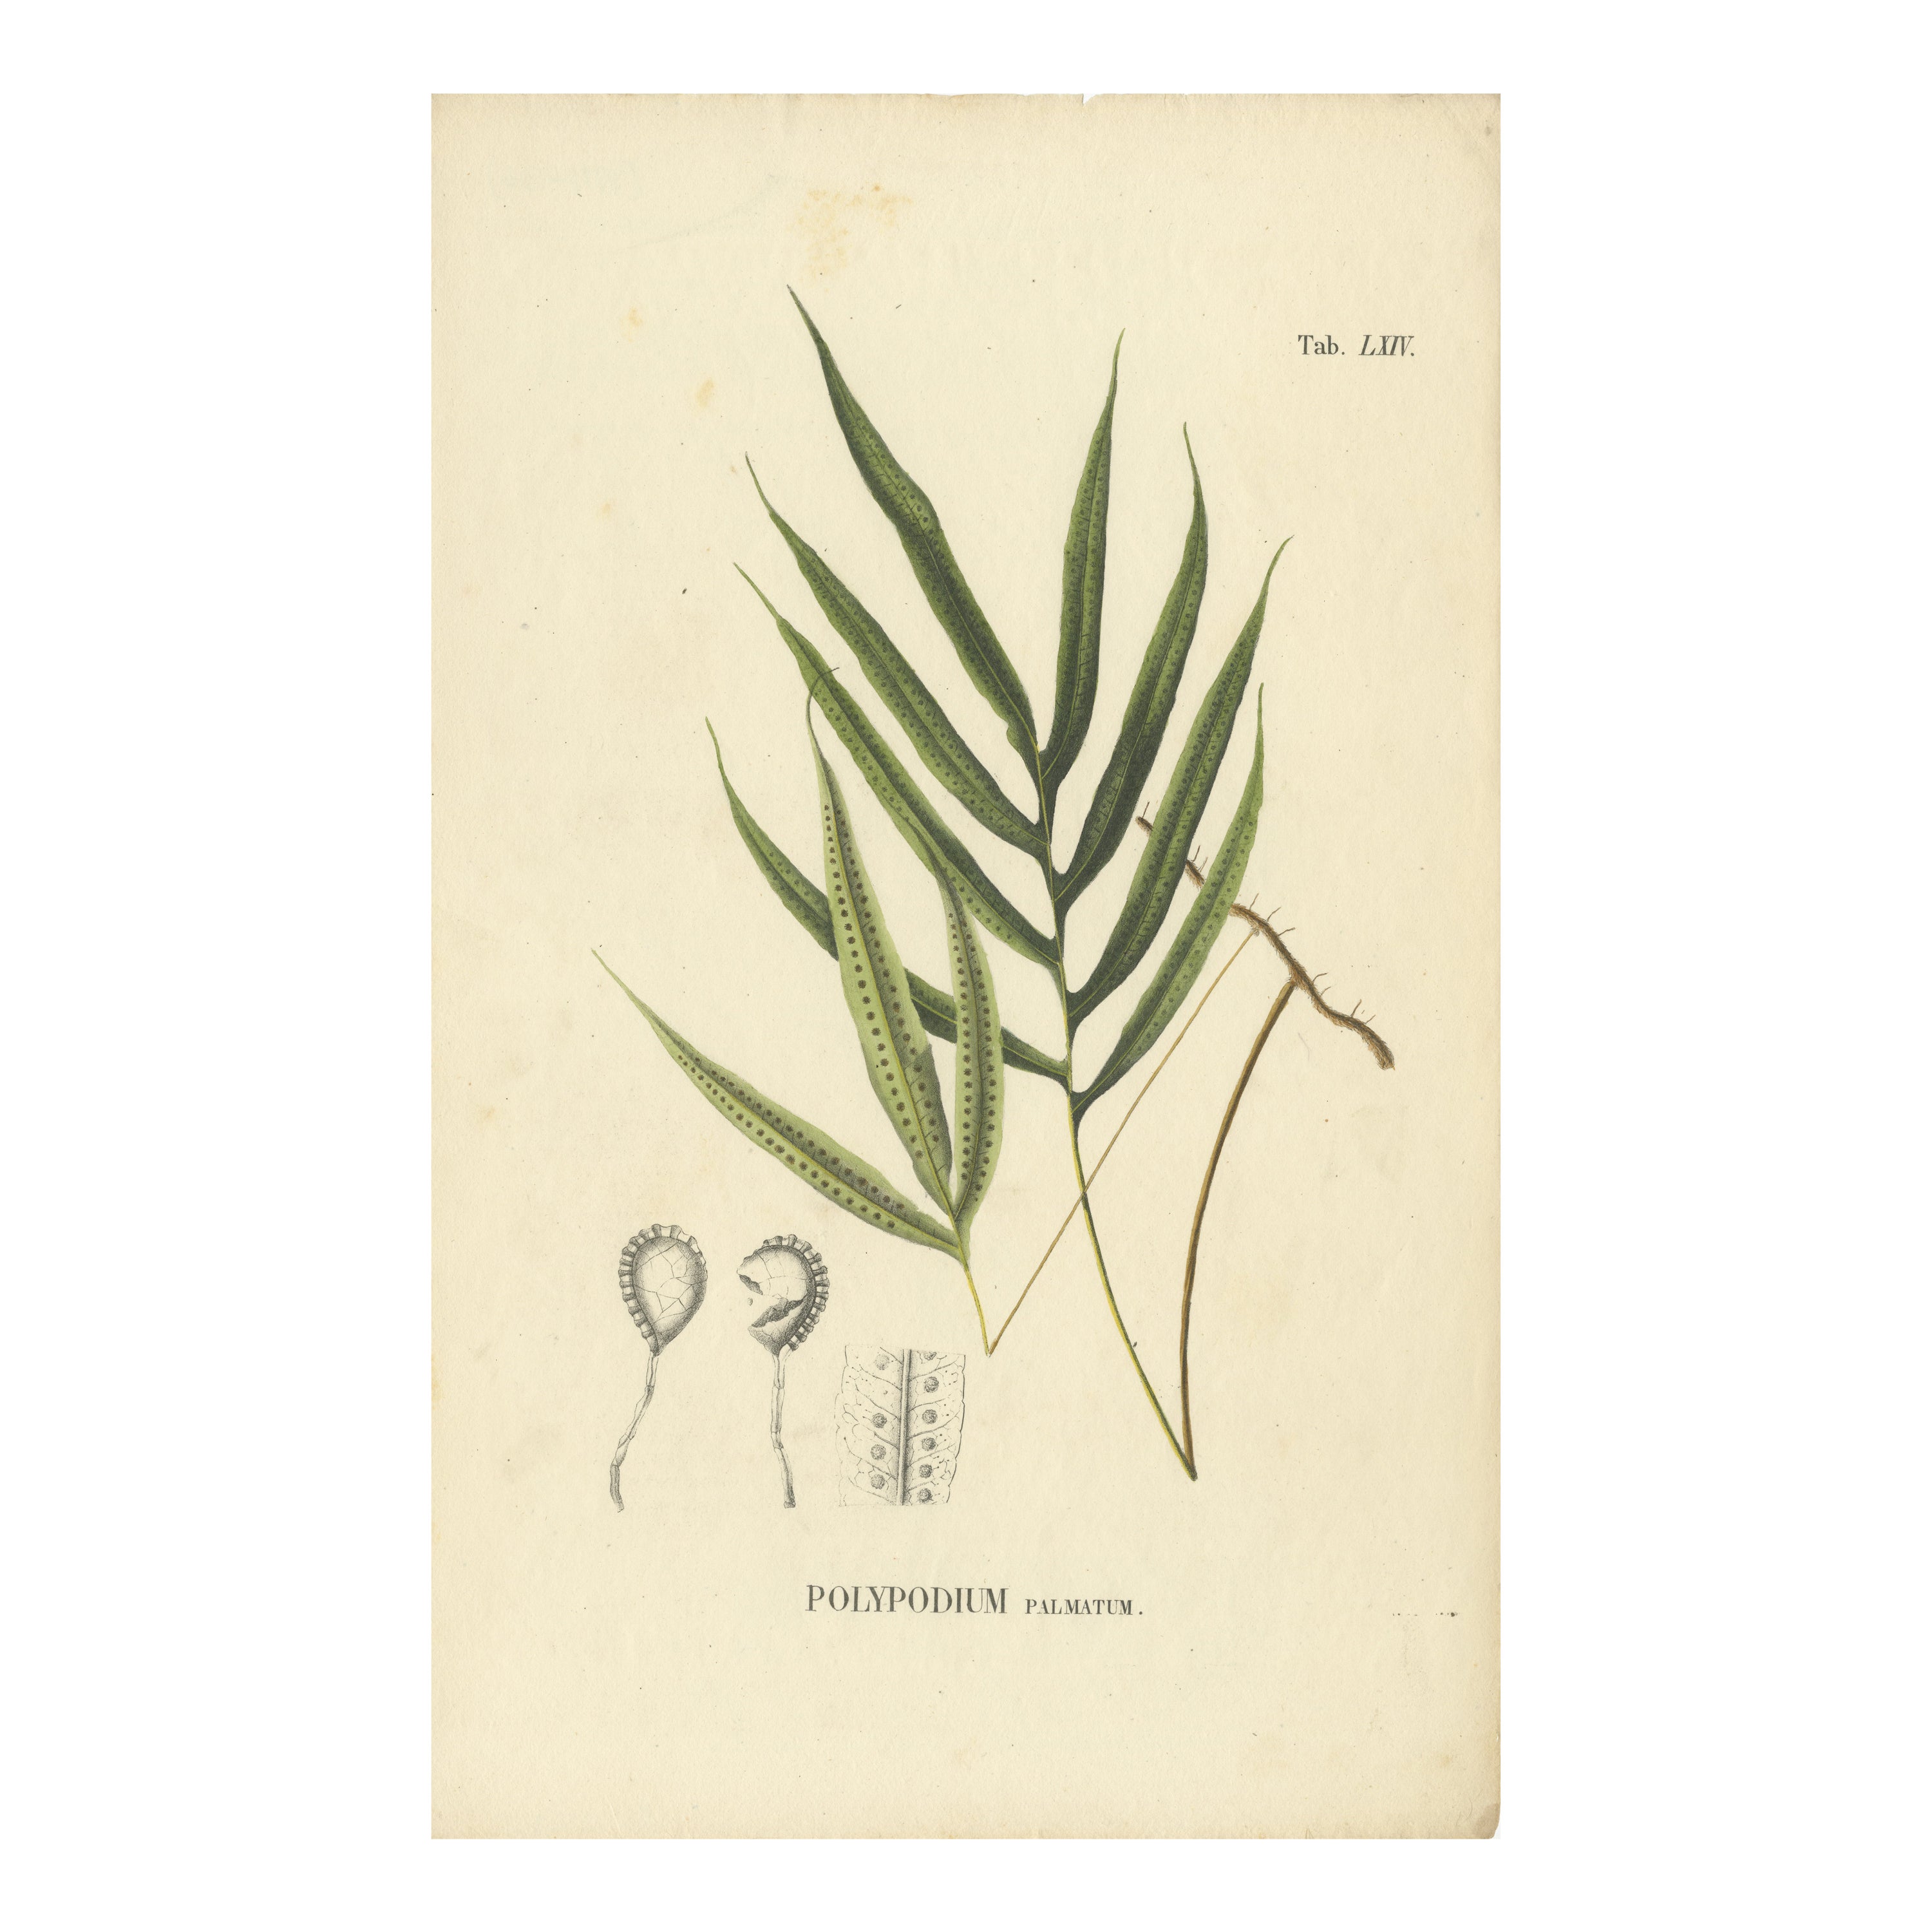 Beautiful, Artfully Crafted Lithograph of Ferns of Indonesia 'Polypodium', 1829